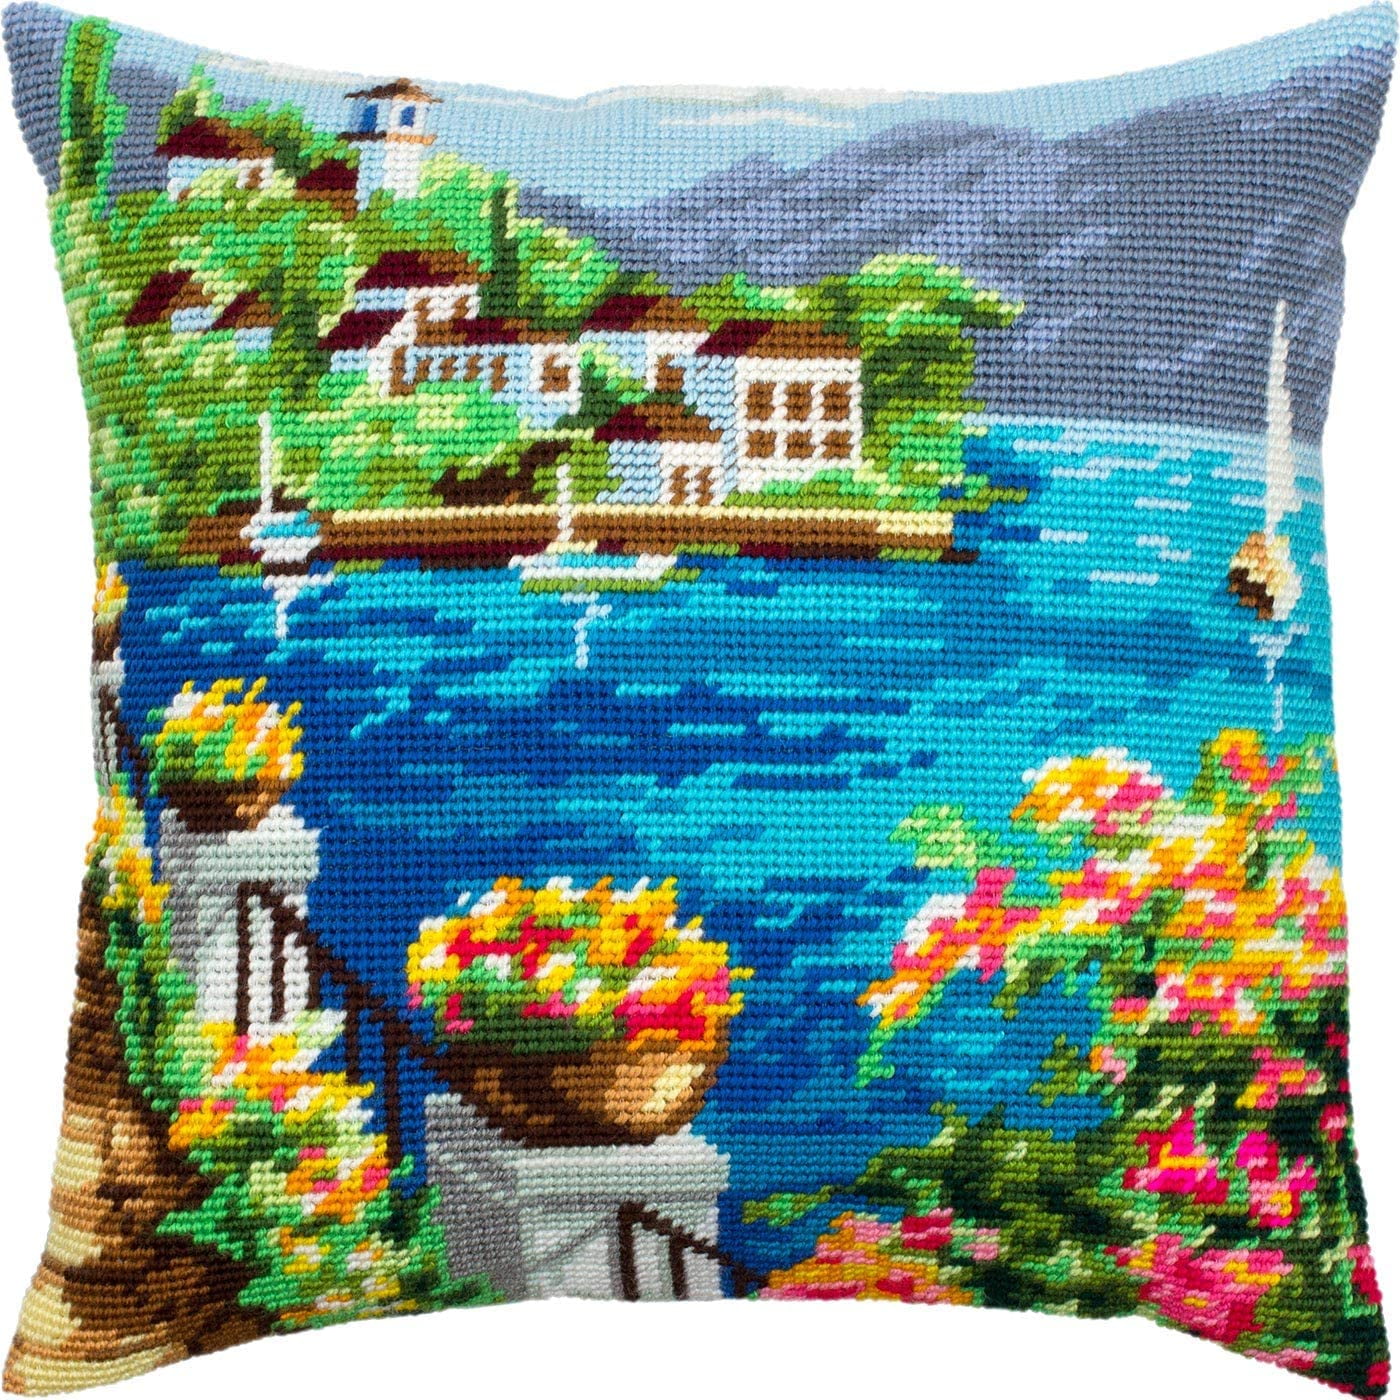 Ethiopia Throw Pillow 16×16 Inches European Quality Cross Stitch Kit Printed Tapestry Canvas 